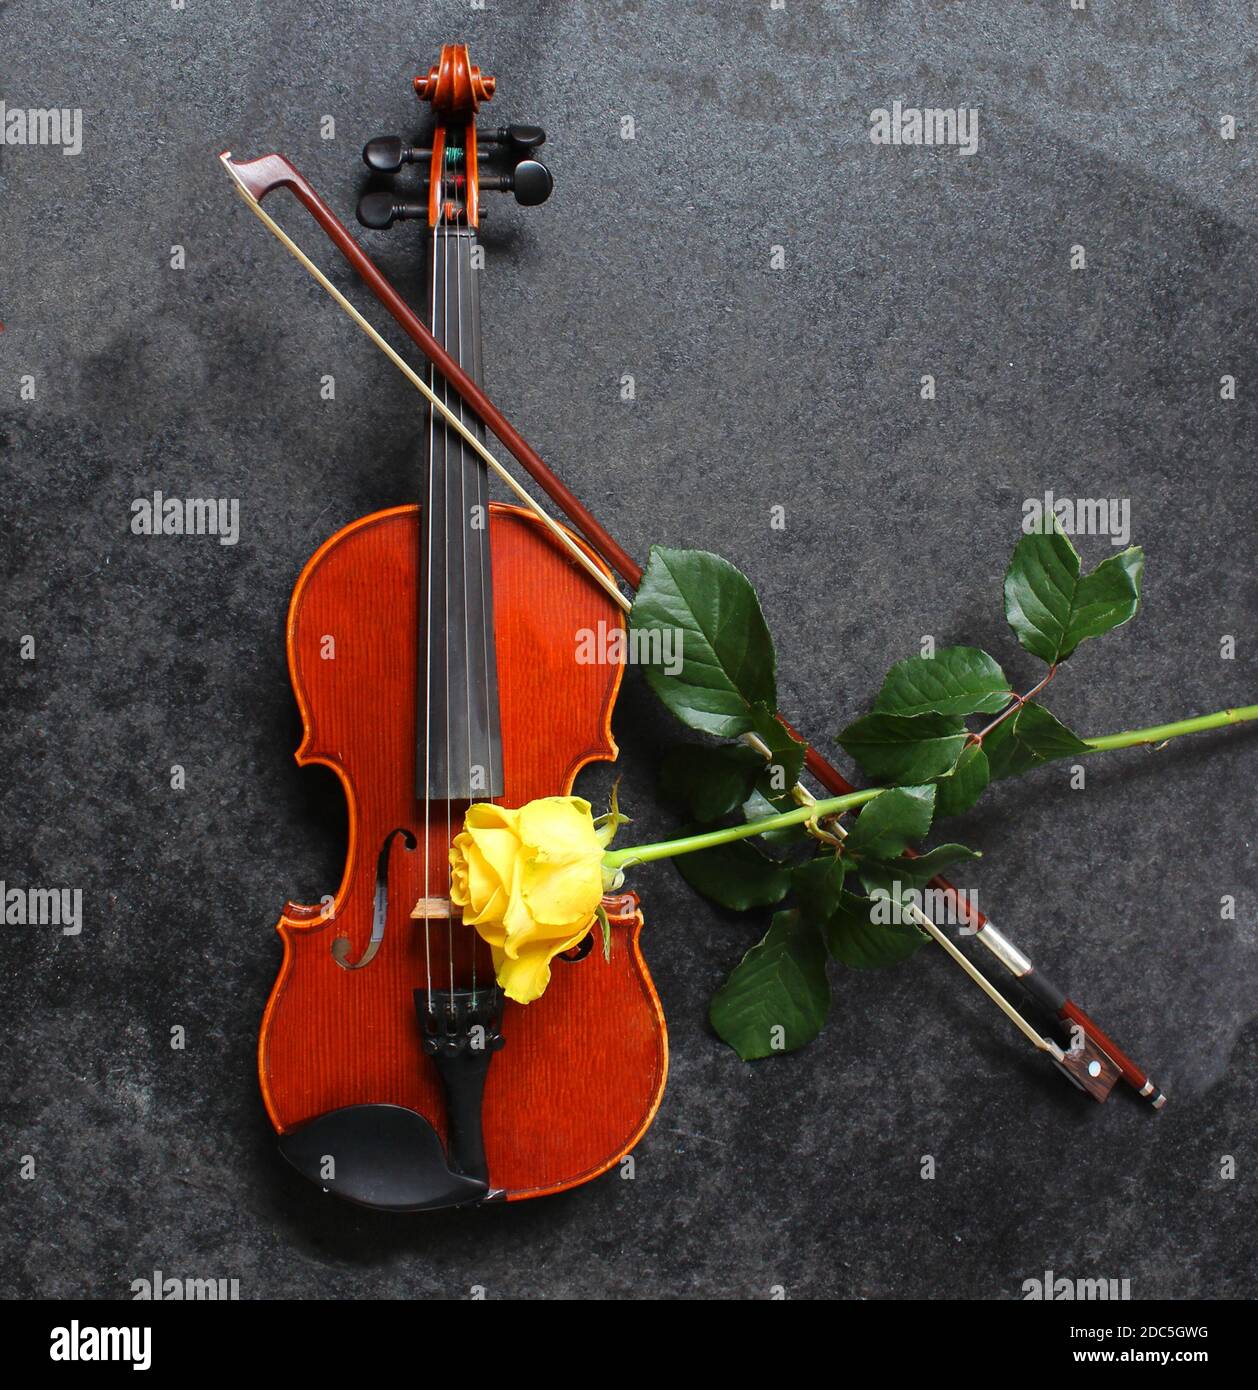 Violin and yellow rose on black background Stock Photo